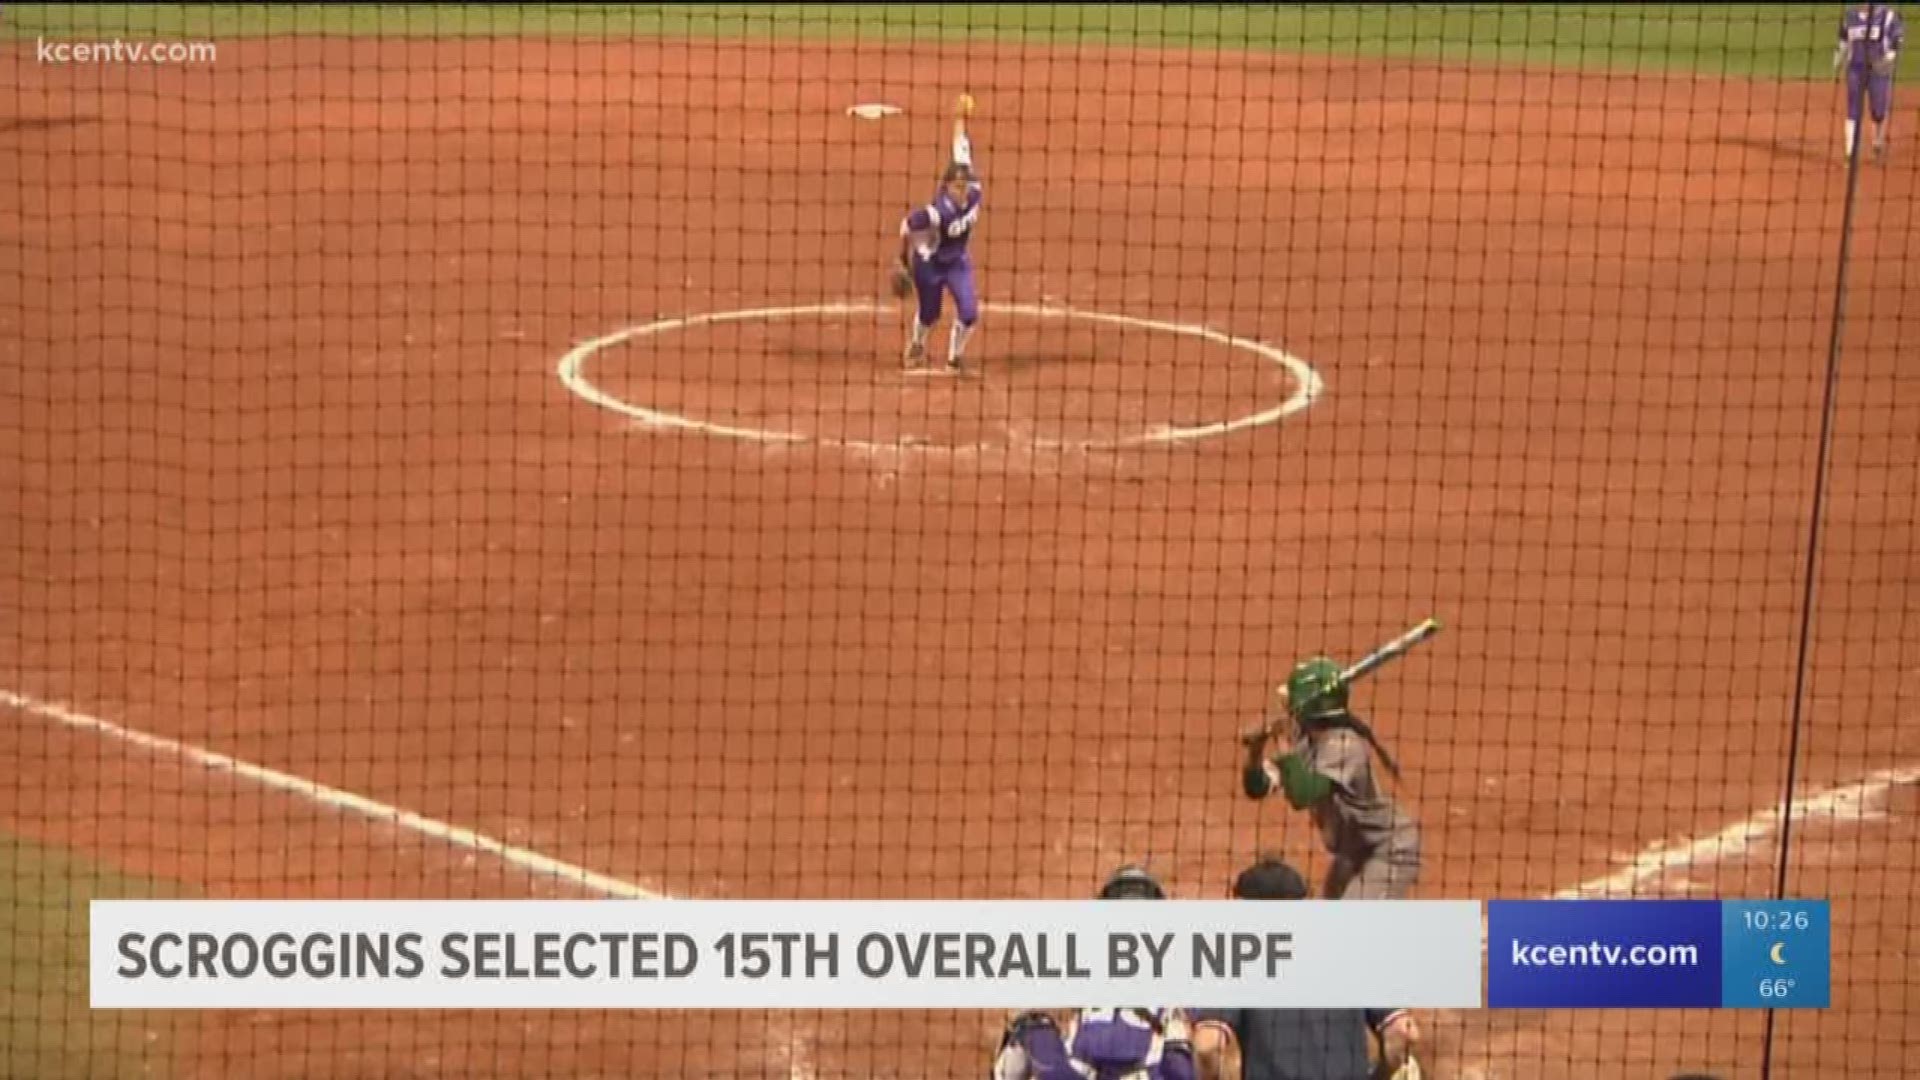 Baylor's Jessie Scroggins was selected 15th overall by the Chicago Bandits. 